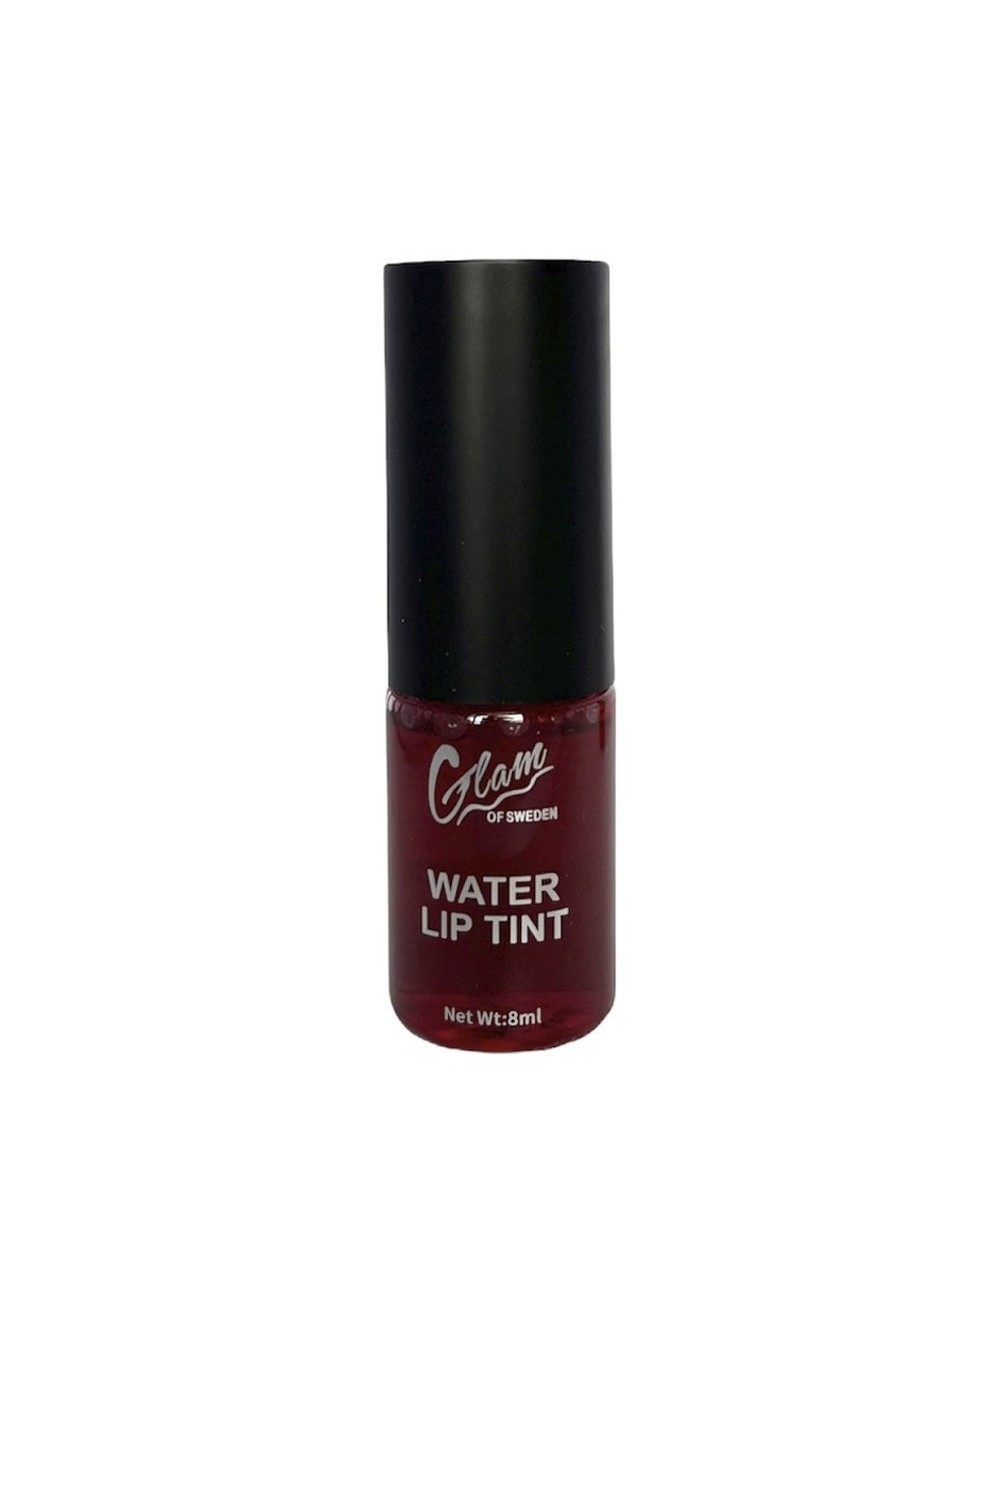 Glam Of Sweden Water Lip Tint Berry 8ml